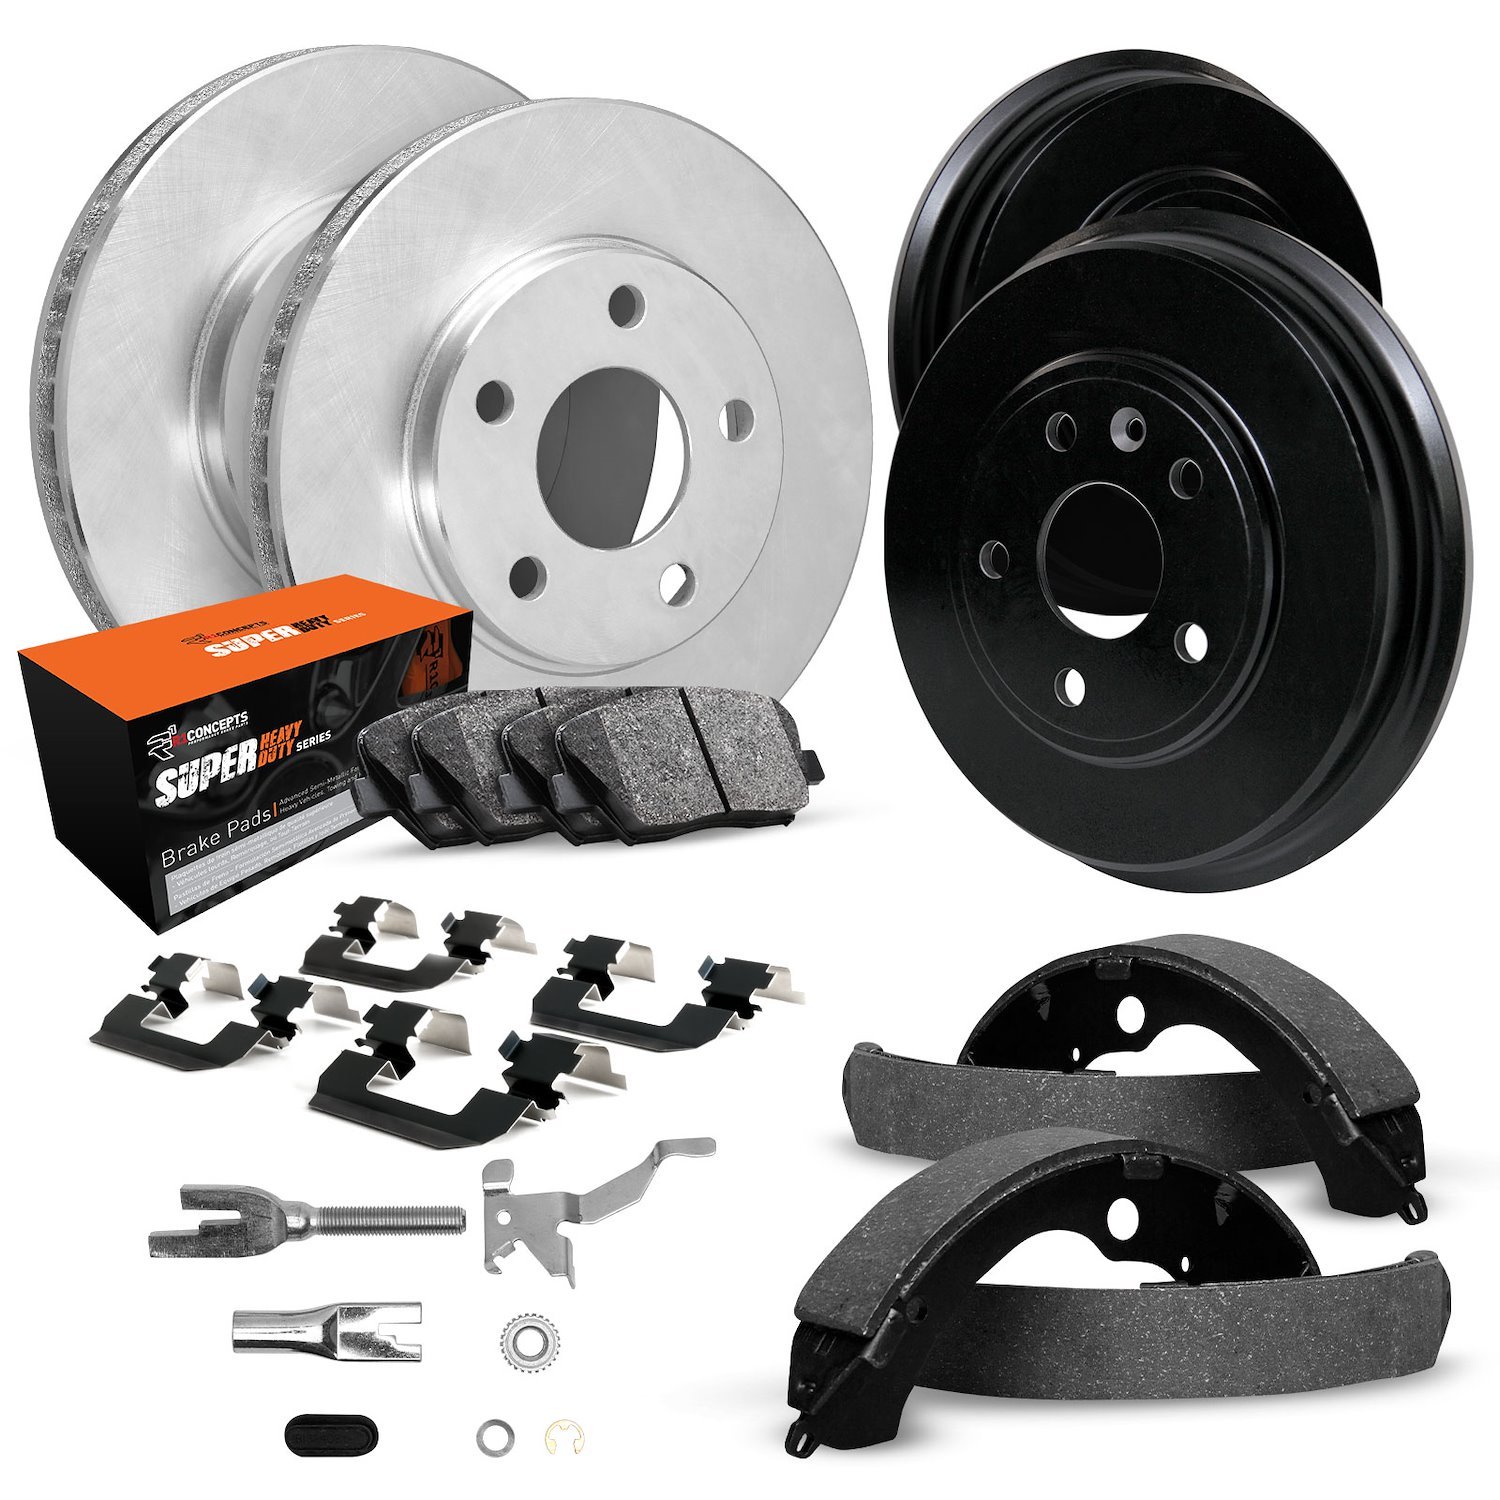 E-Line Blank Brake Rotor & Drum Set w/Super-Duty Pads, Shoes, Hardware, & Adjusters, 1969-1974 GM, Position: Front & Rear